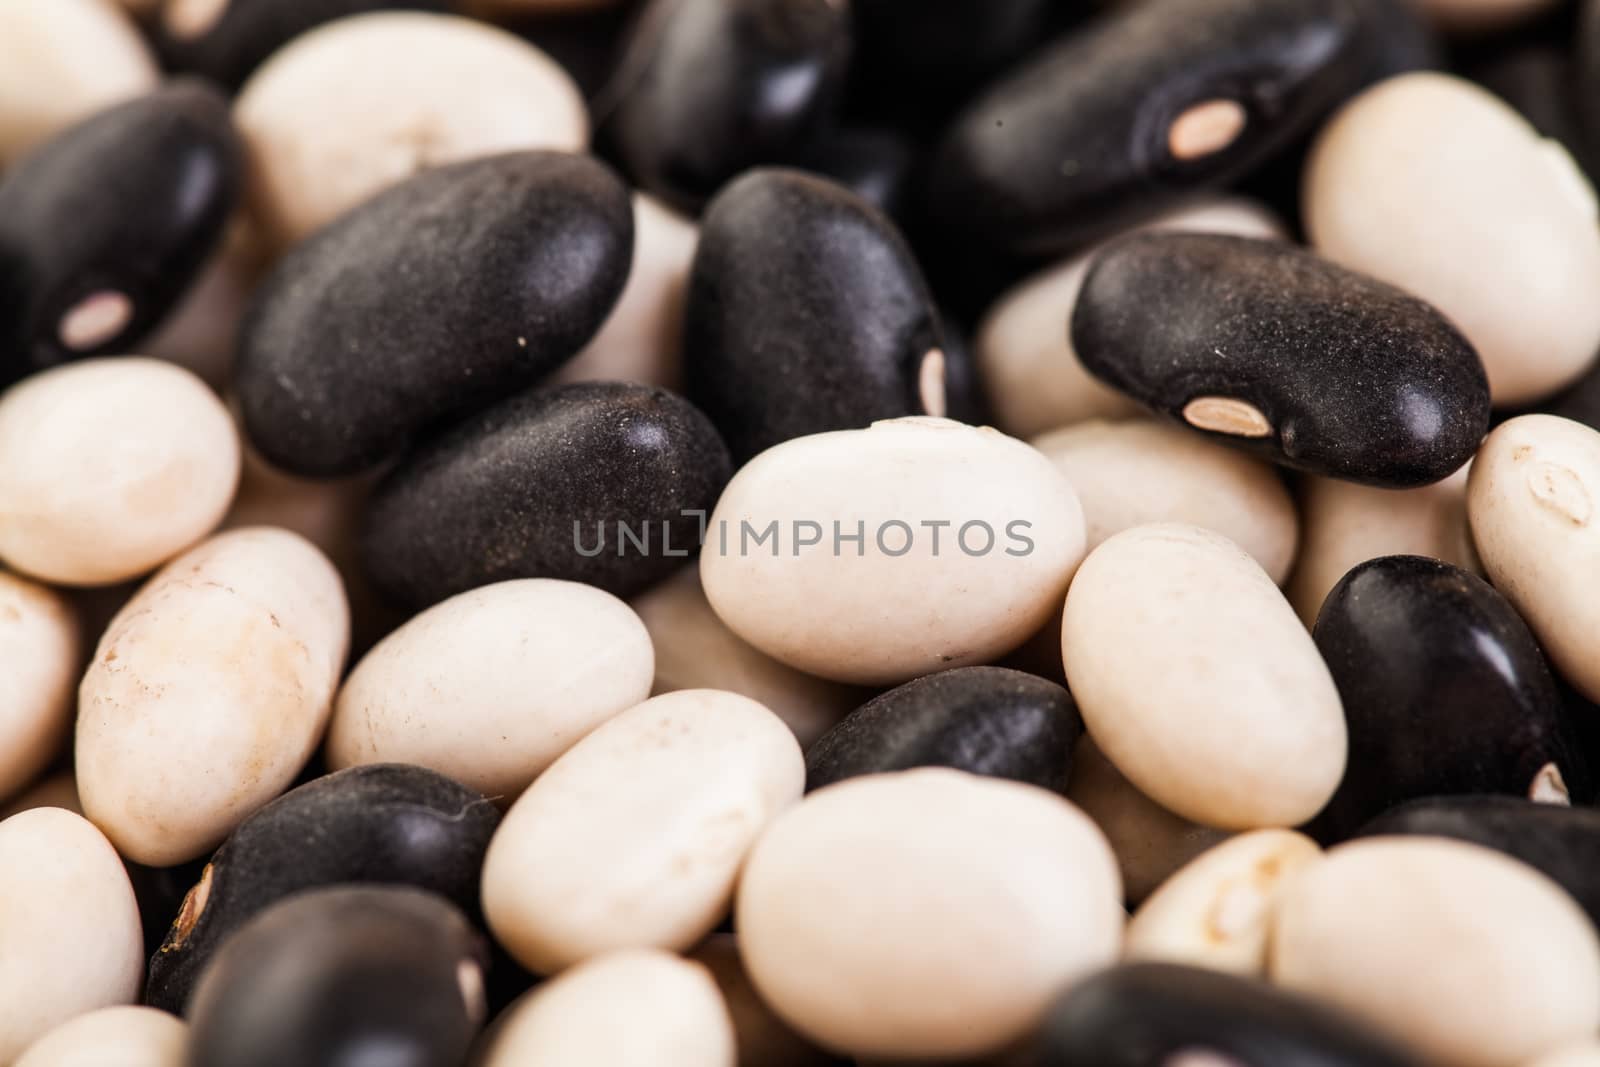 Extreme Closeup Texture of Black and White Beans by aetb